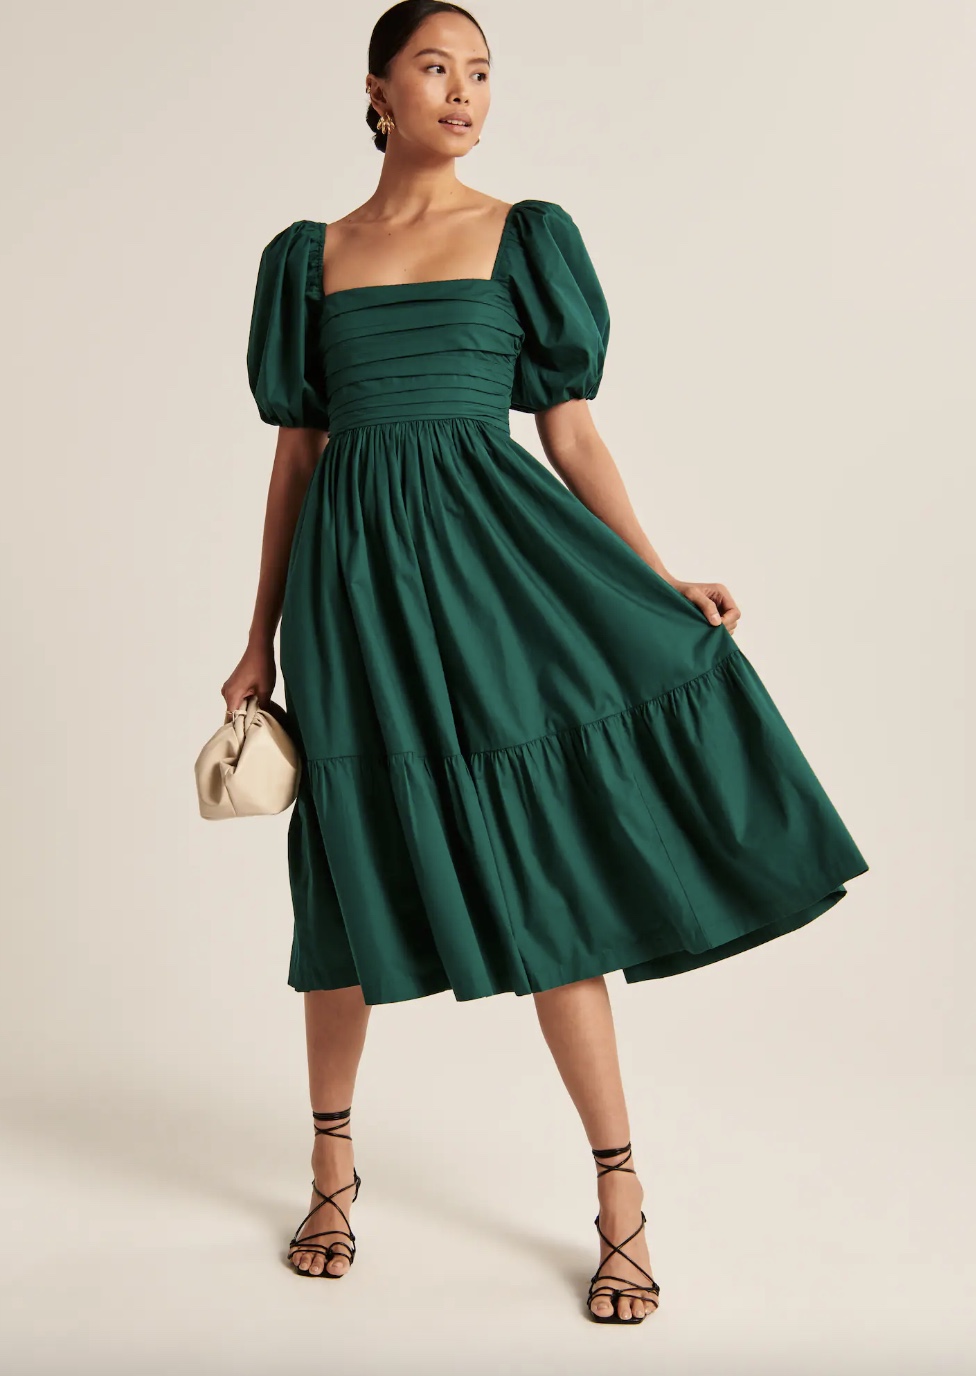 Fall Wedding Guest Dresseses